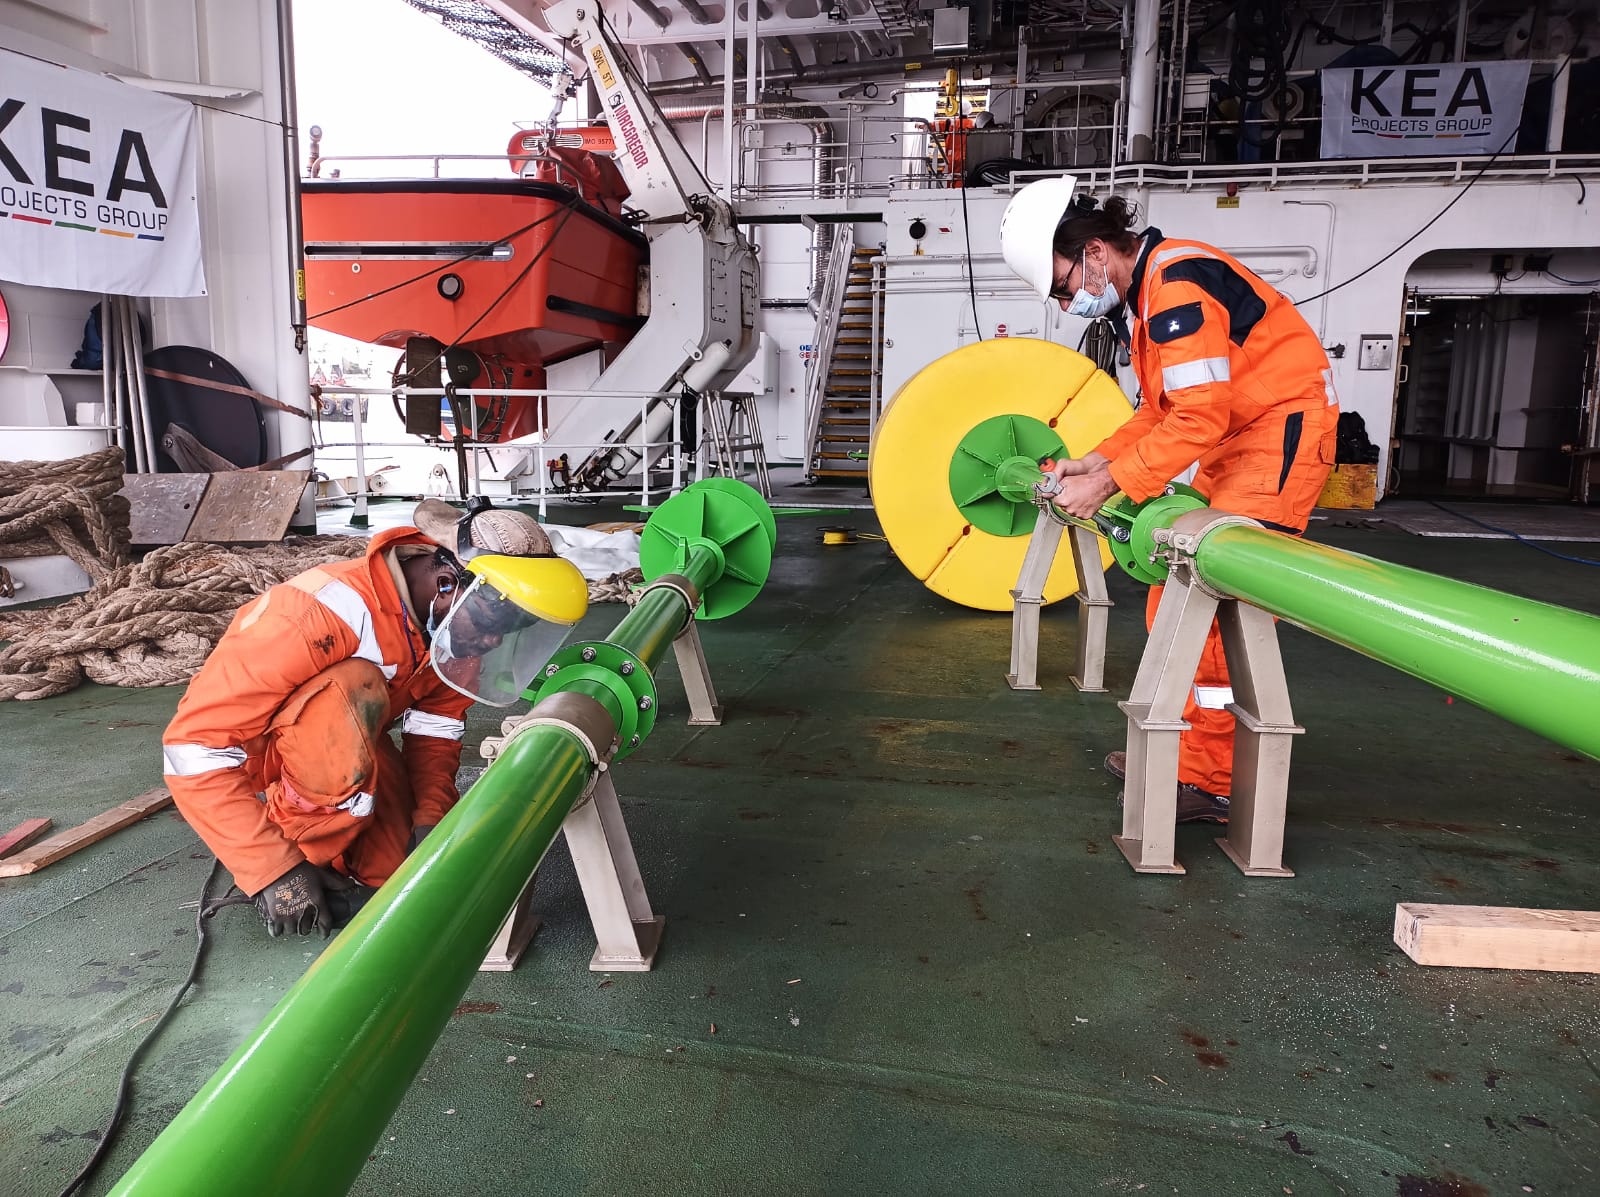 Engineers aboard Agulhas II prepare metal tubes called a "fish pole" used to protect the fiber optic cable of the Sabertooth underwater robots that will be used in searching for the Endurance - Endurance22